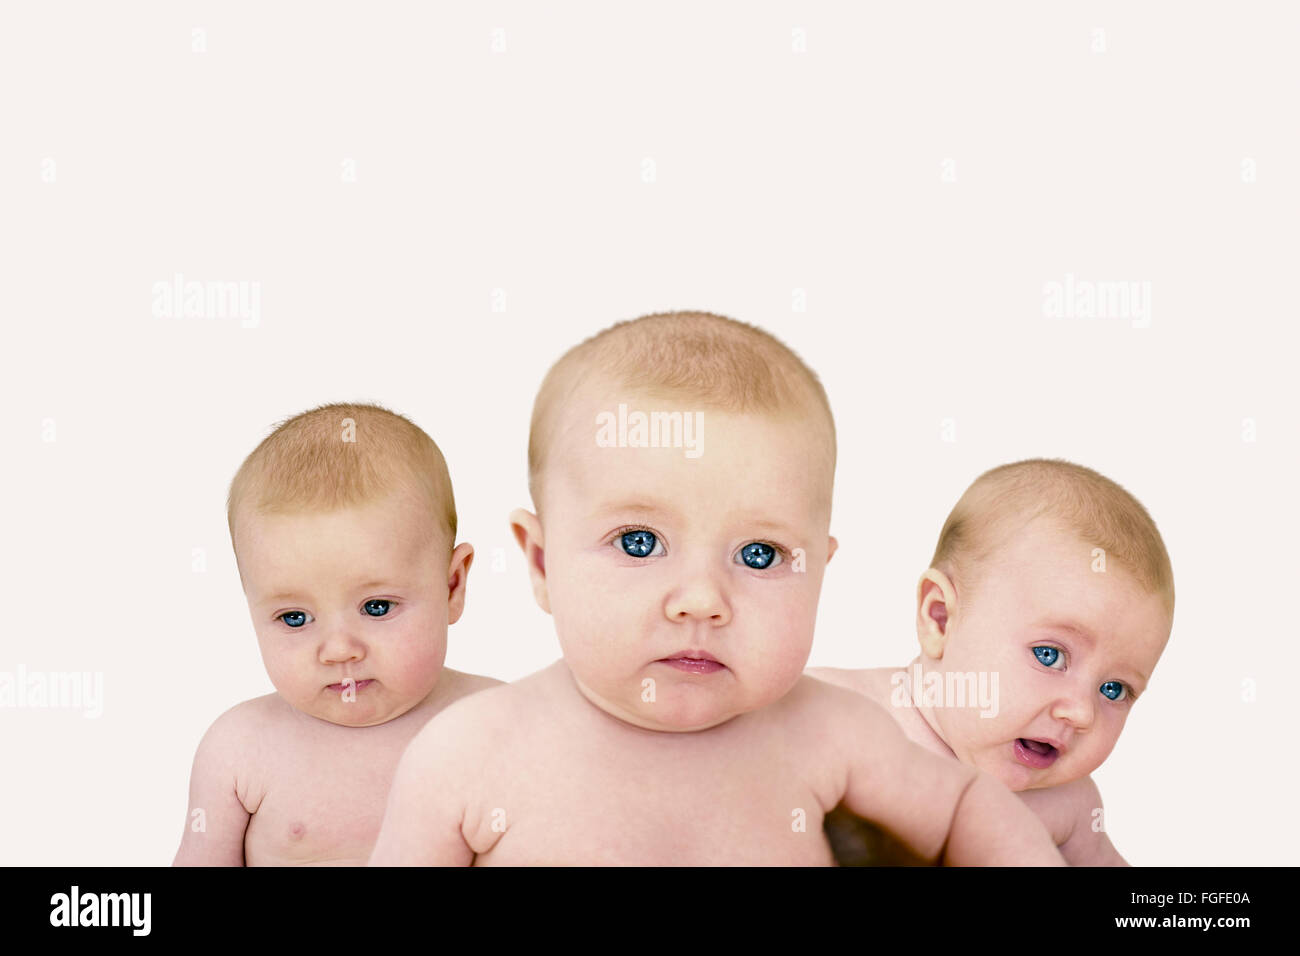 Portrait of three baby girls against a white background Stock Photo